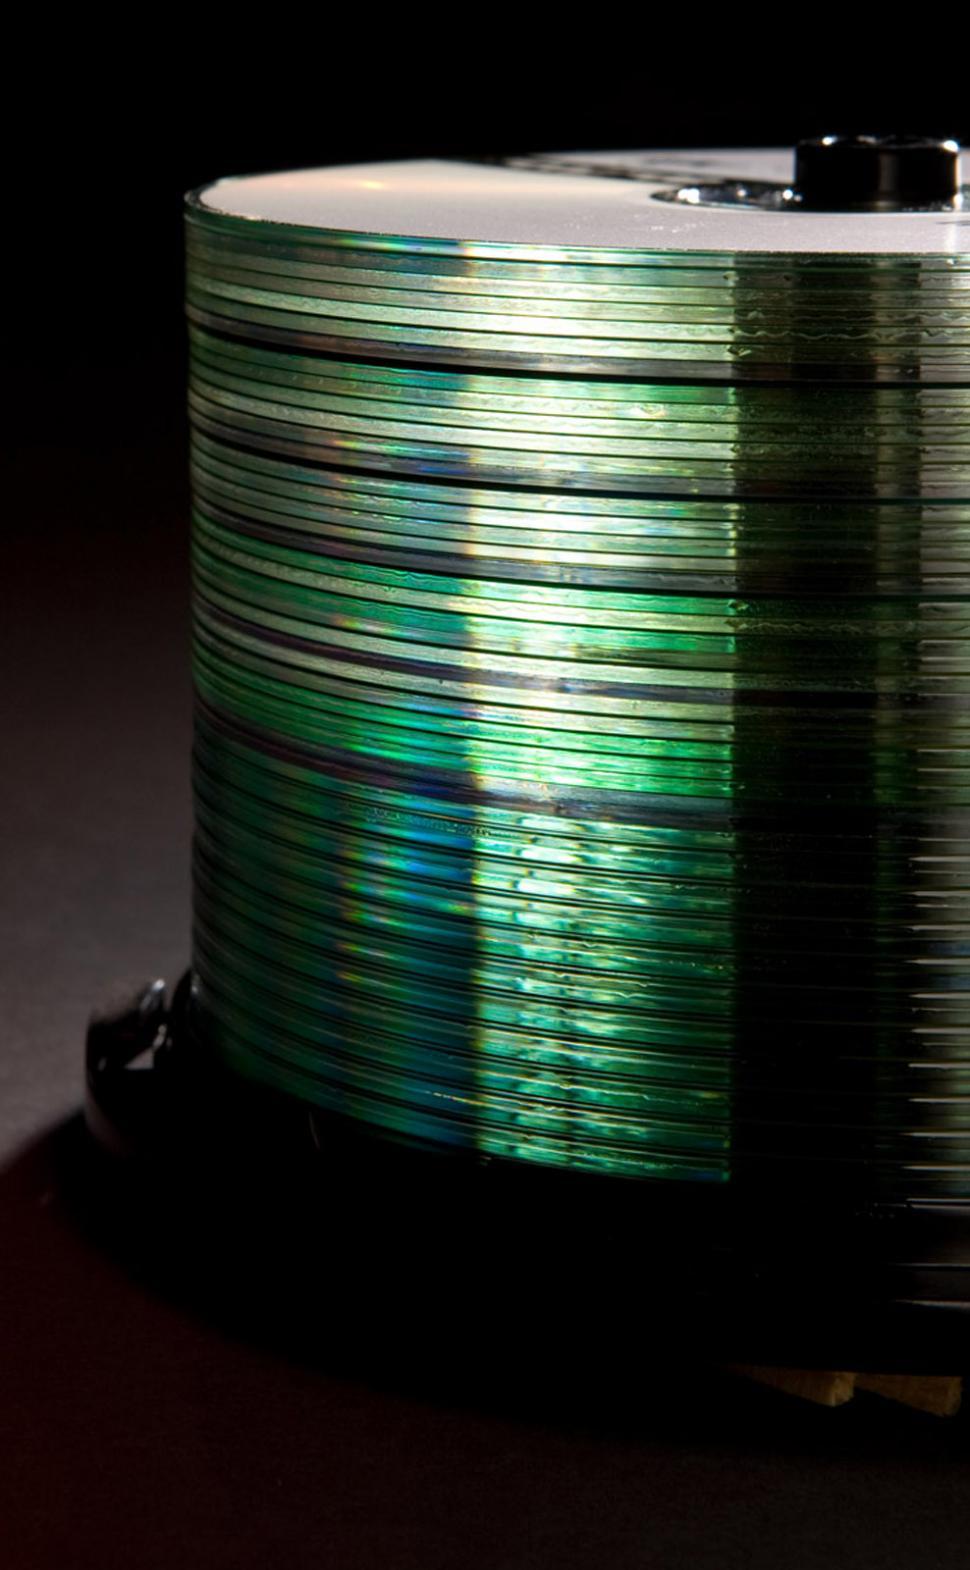 Free Image of Spool of Green Wire on Table 